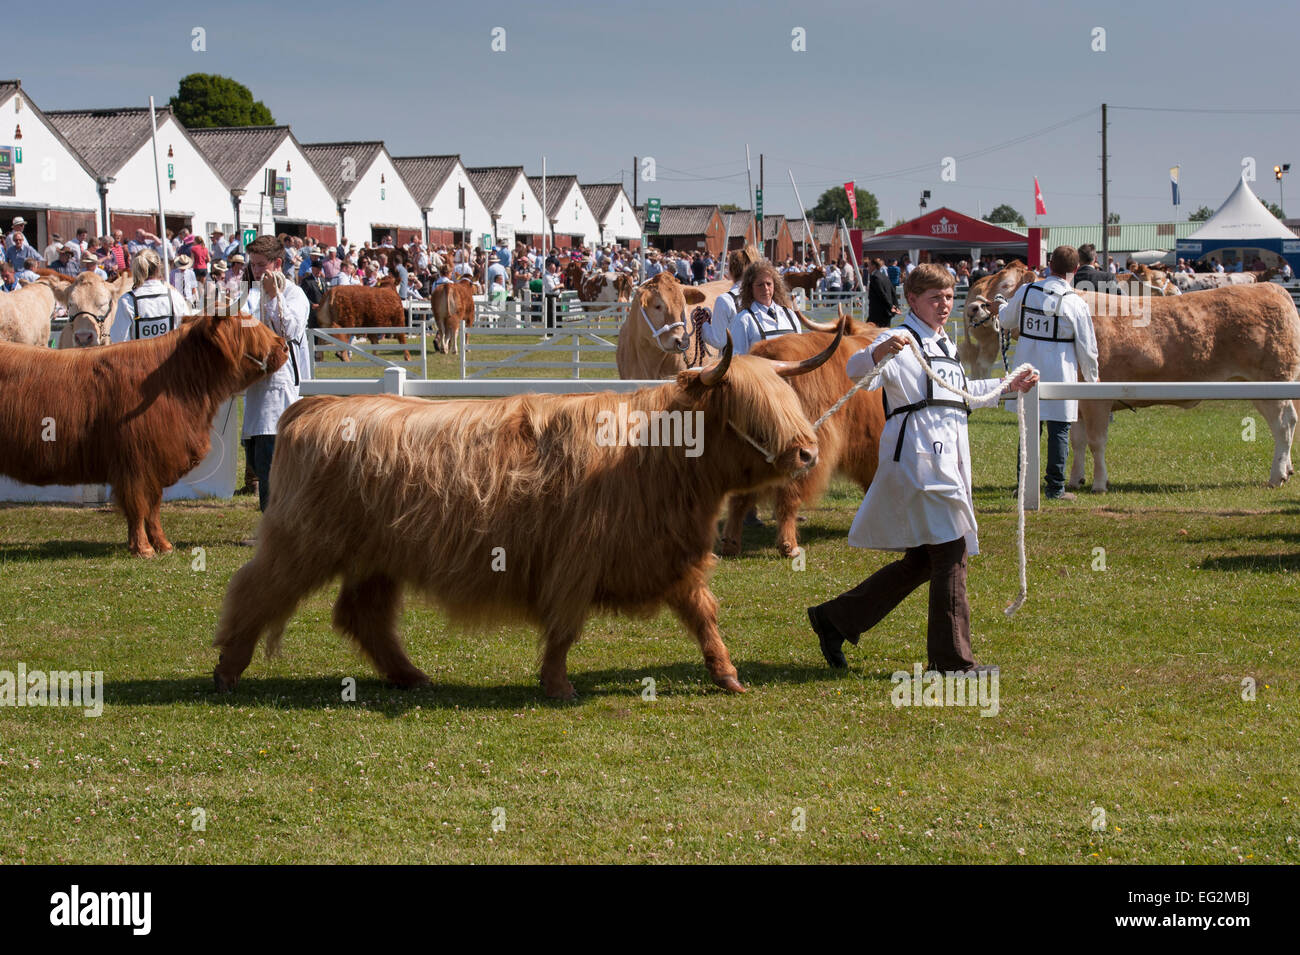 On a sunny summer day, Highland Cattle competing in a show are led round parade ring by handlers - Great Yorkshire Show Harrogate, England, UK. Stock Photo